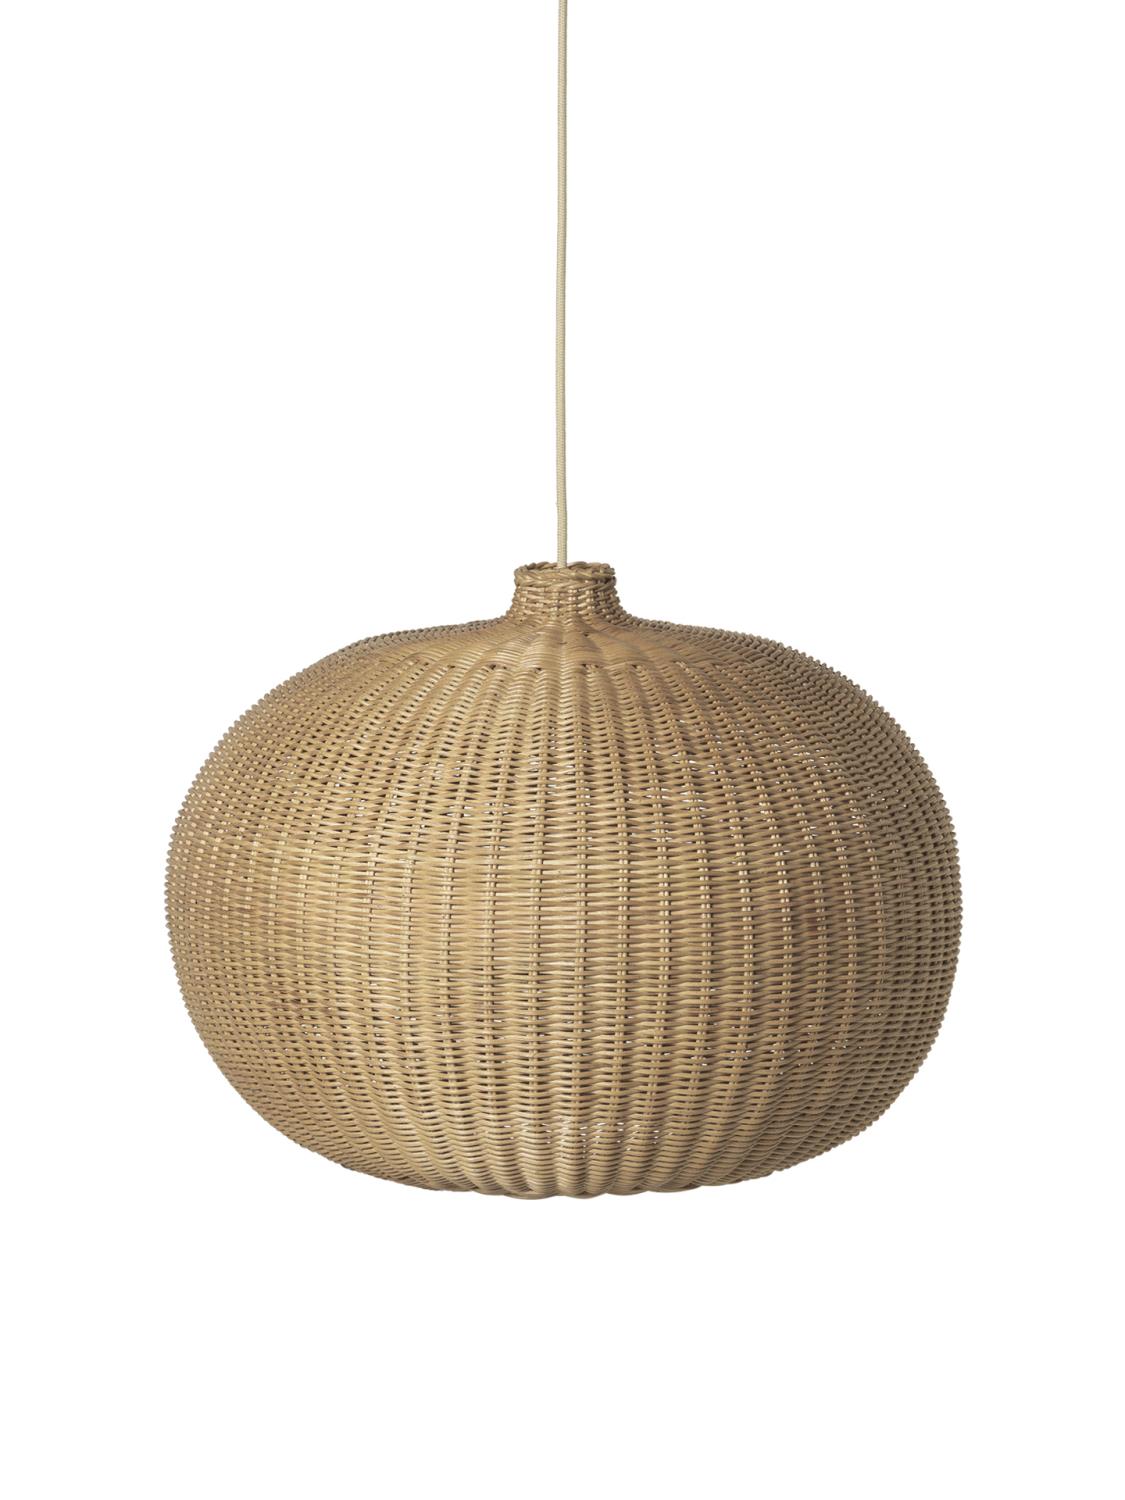 Ferm Living - Braided Belly Lamp Shade - Natural